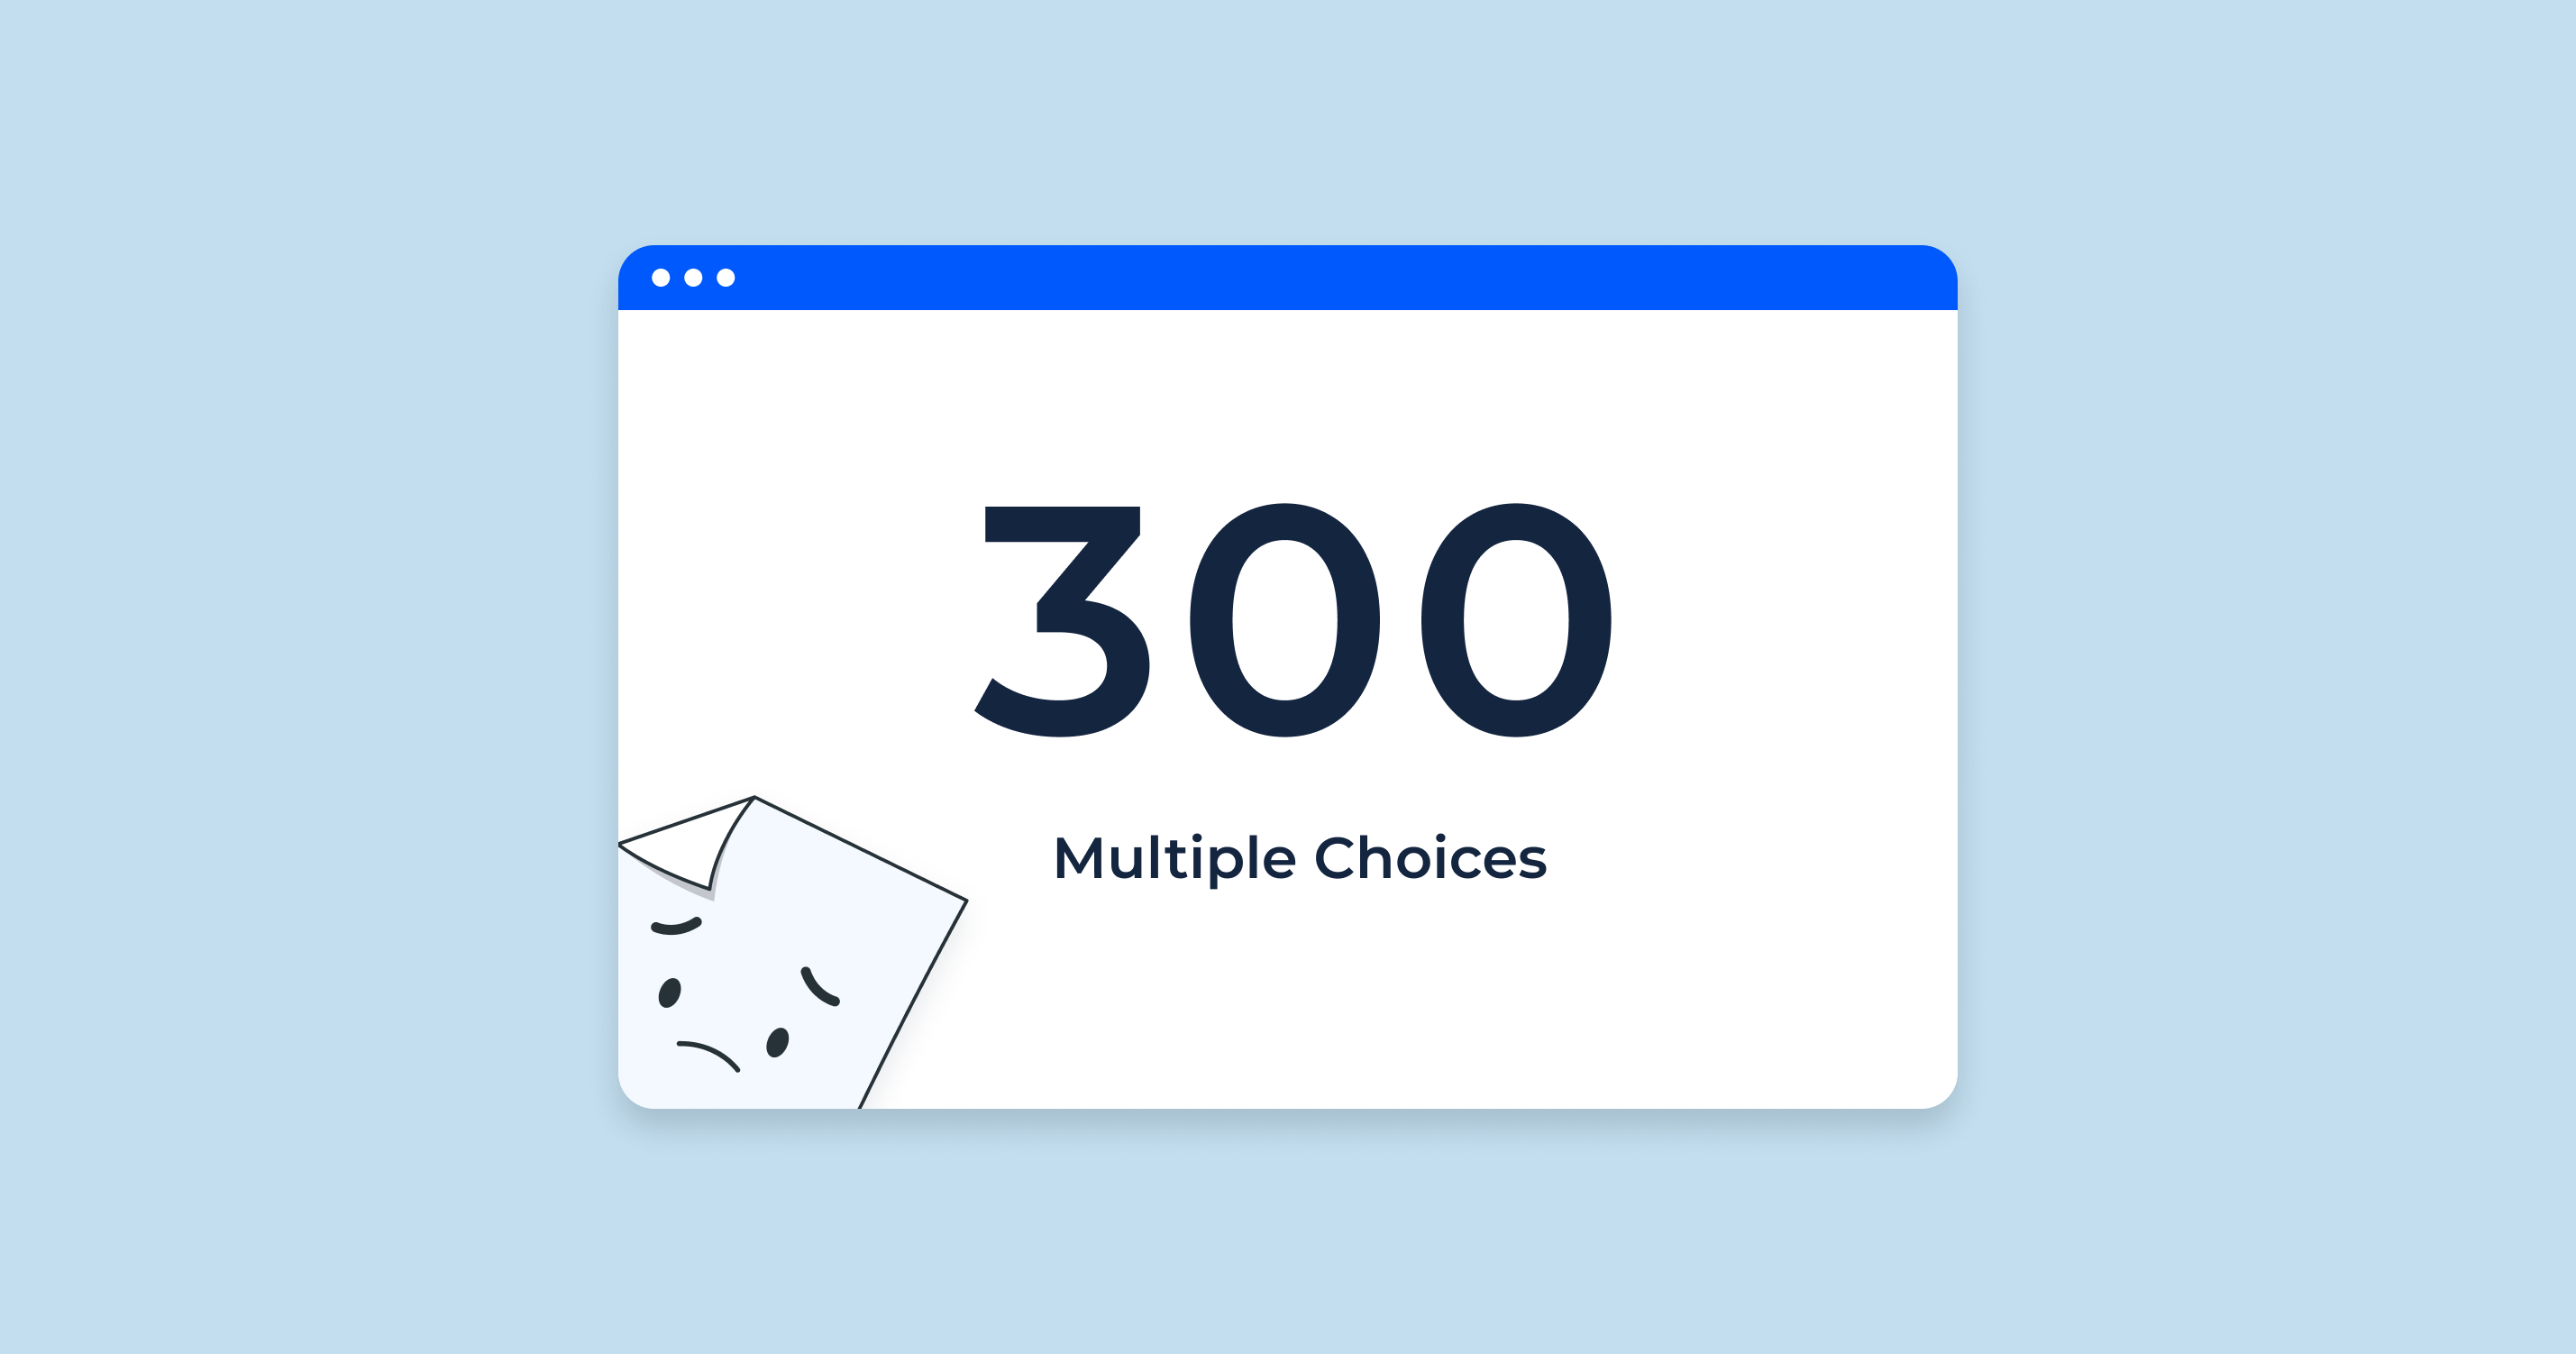 HTTP 300 “Multiple Choices”: Meaning, Issues with 300 Status Codes